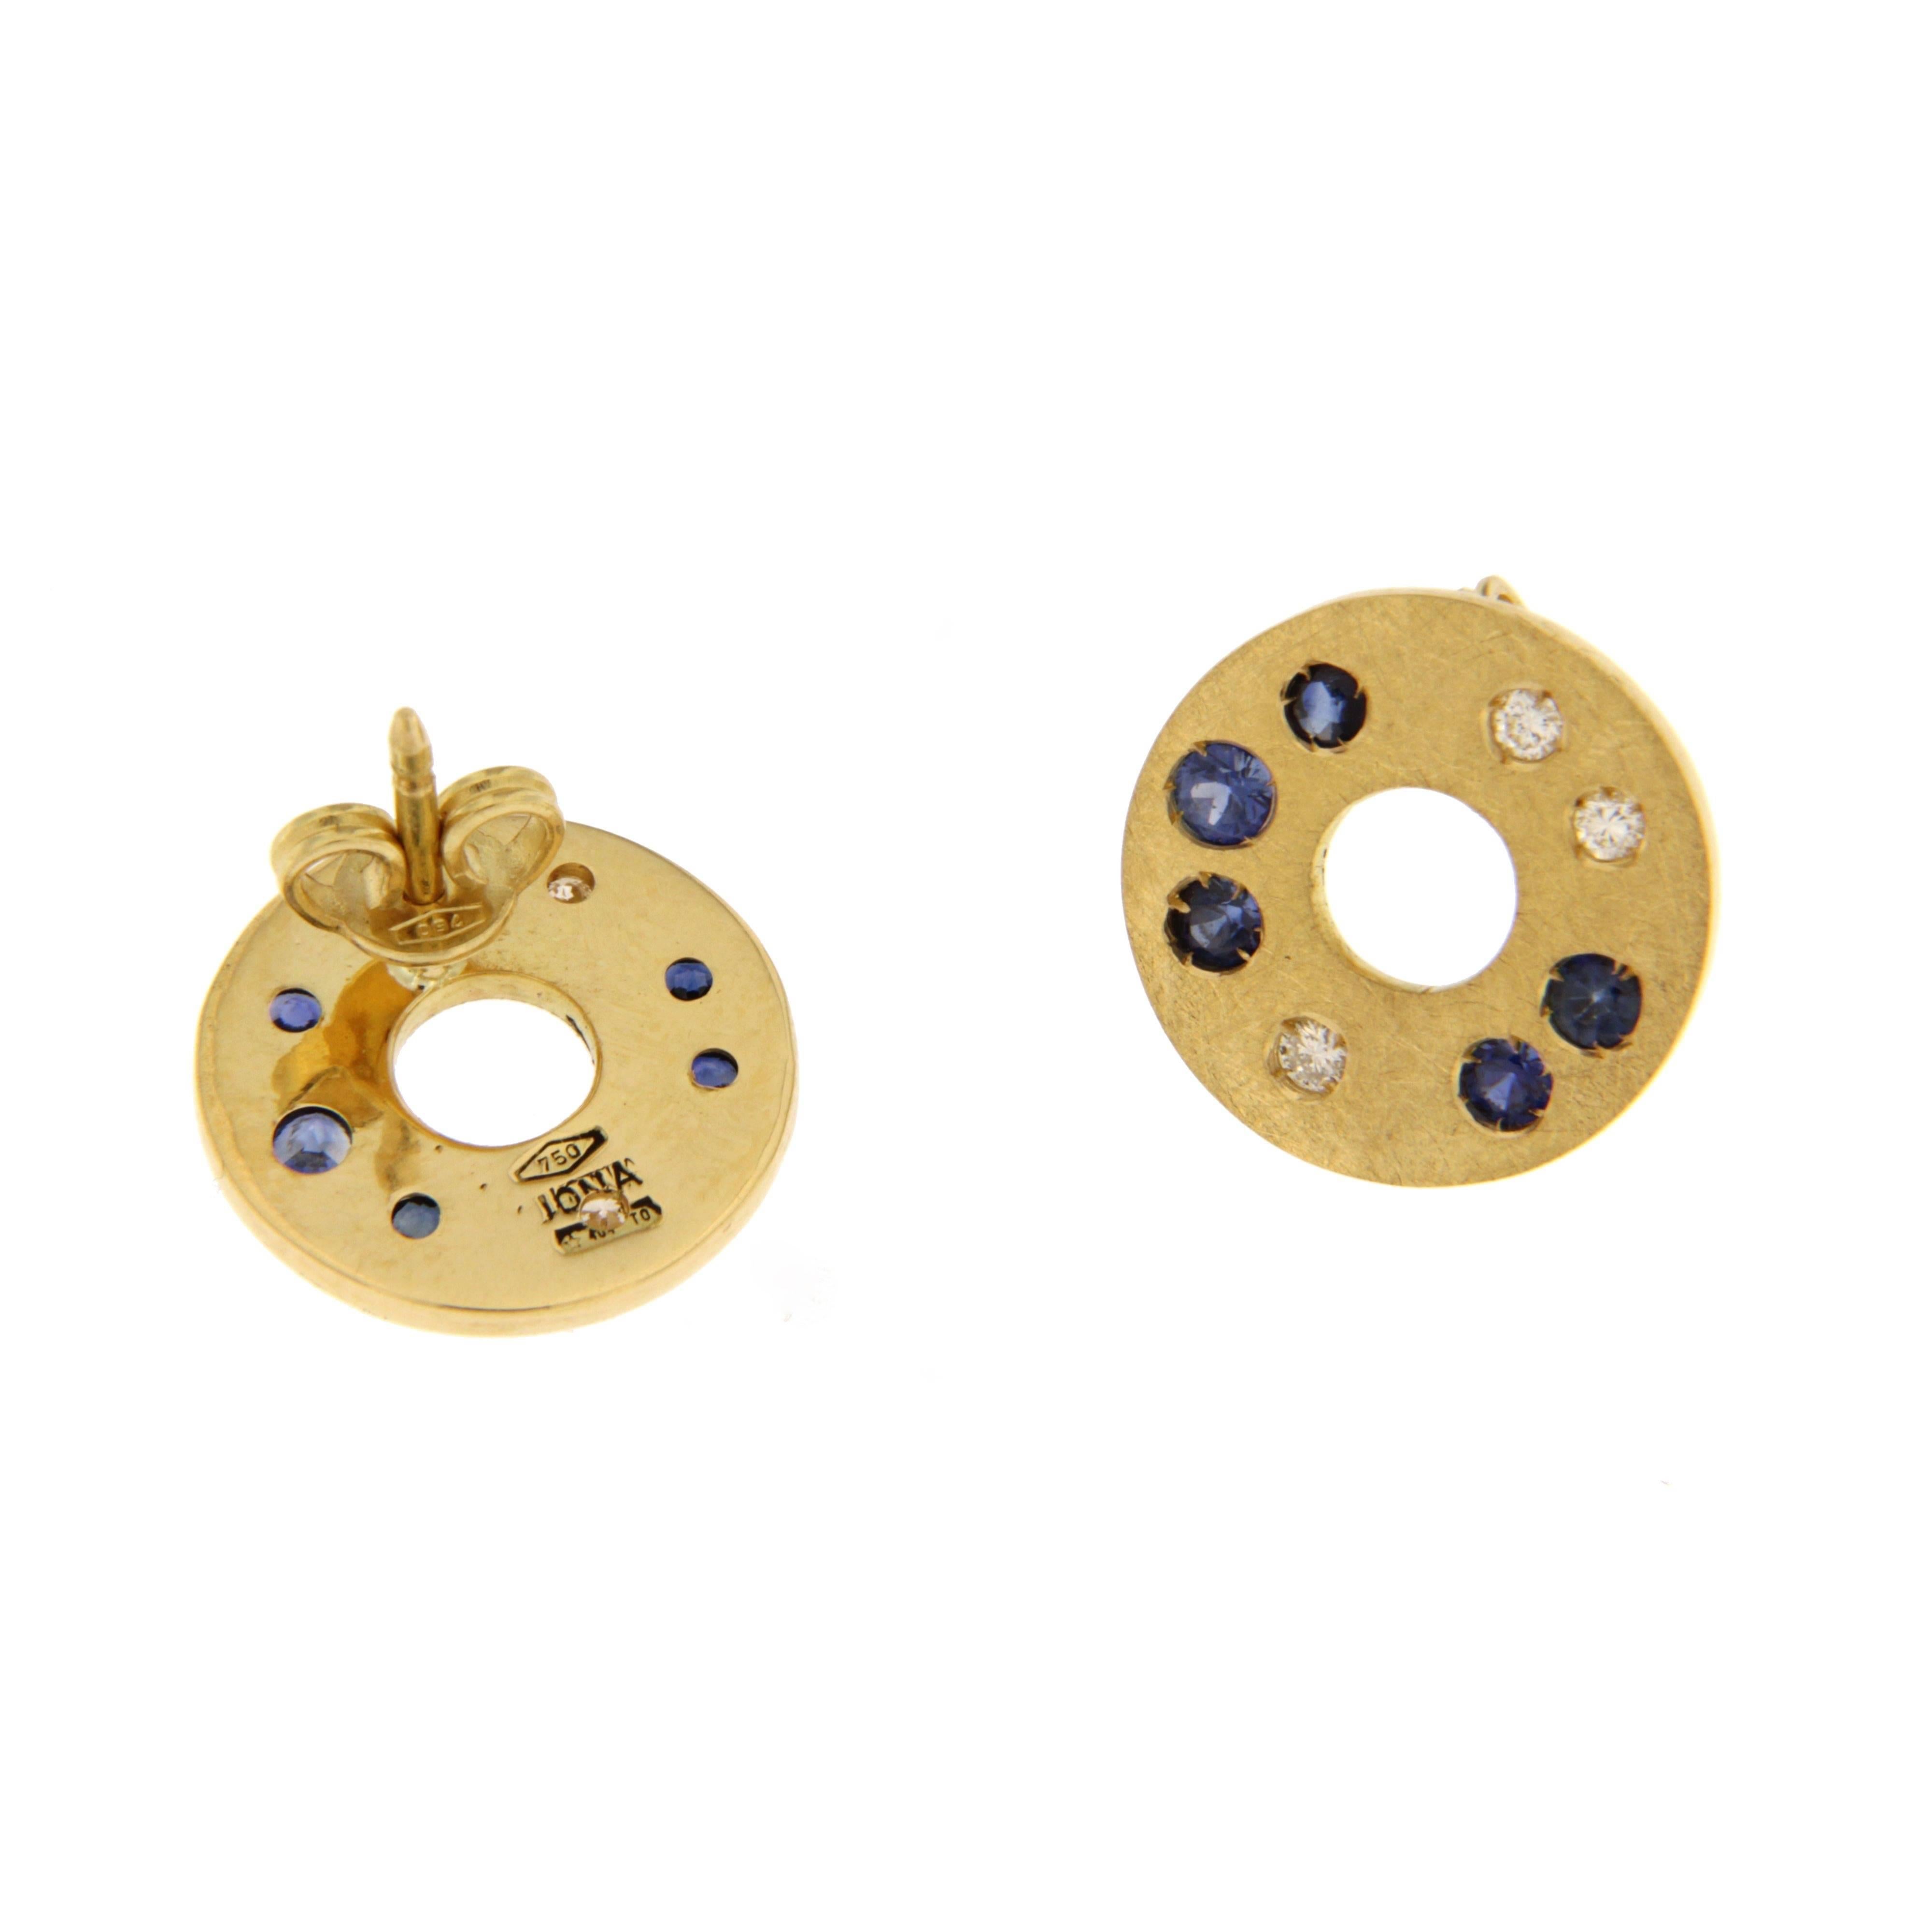 Jona design collection, hand crafted in Italy, 18 karat brushed yellow gold stud earrings set with brilliant cut white diamonds (ct. 0.19) and blue sapphires (ct. 0.56).

All Jona jewelry is new and has never been previously owned or worn. Each item